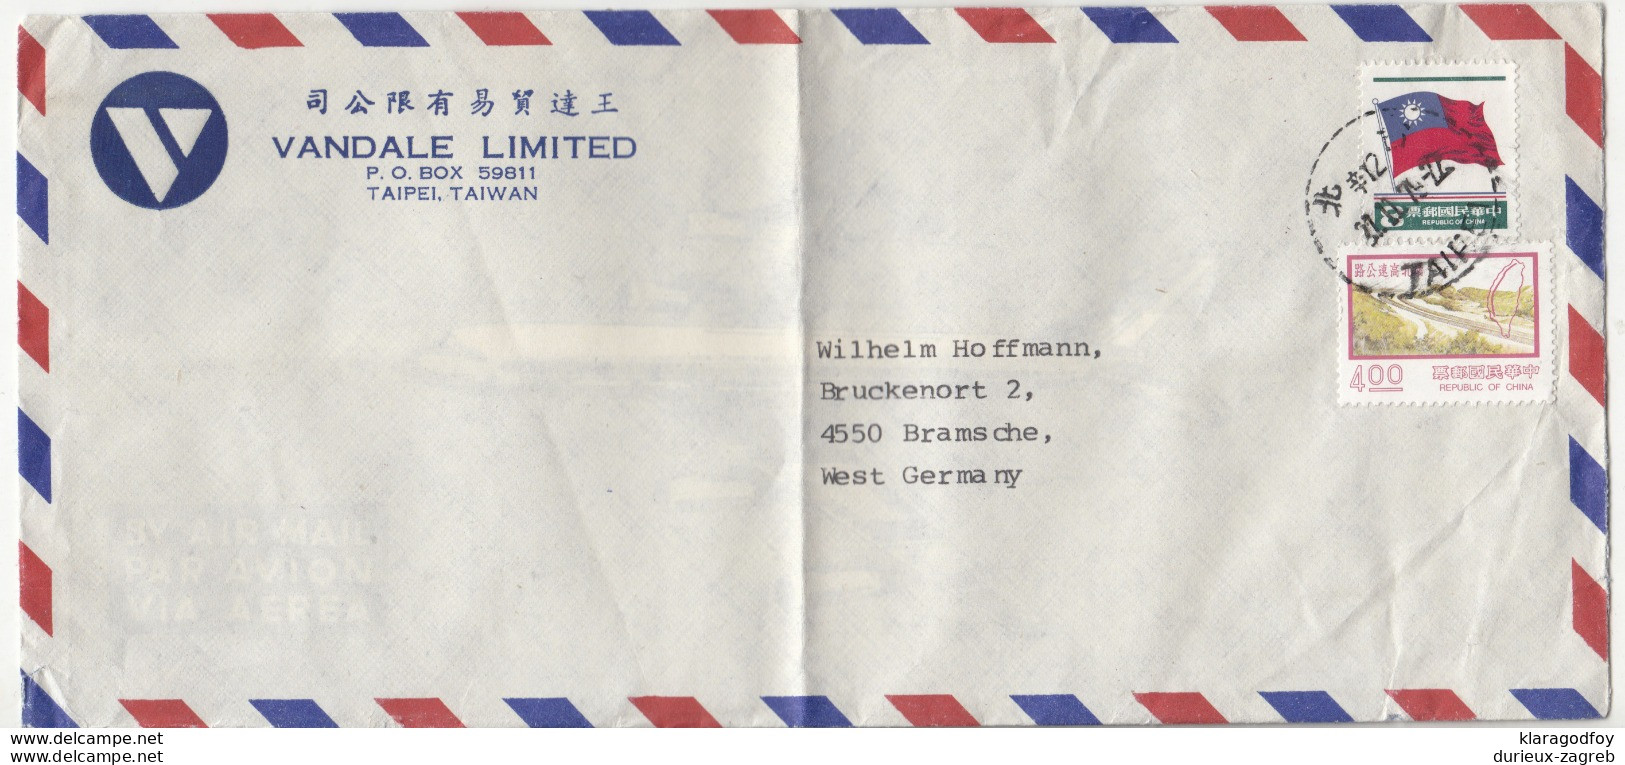 Vandale Limited Taipei Company Air Mail Letter Cover Travelled 197? To Germany B190922 - Briefe U. Dokumente